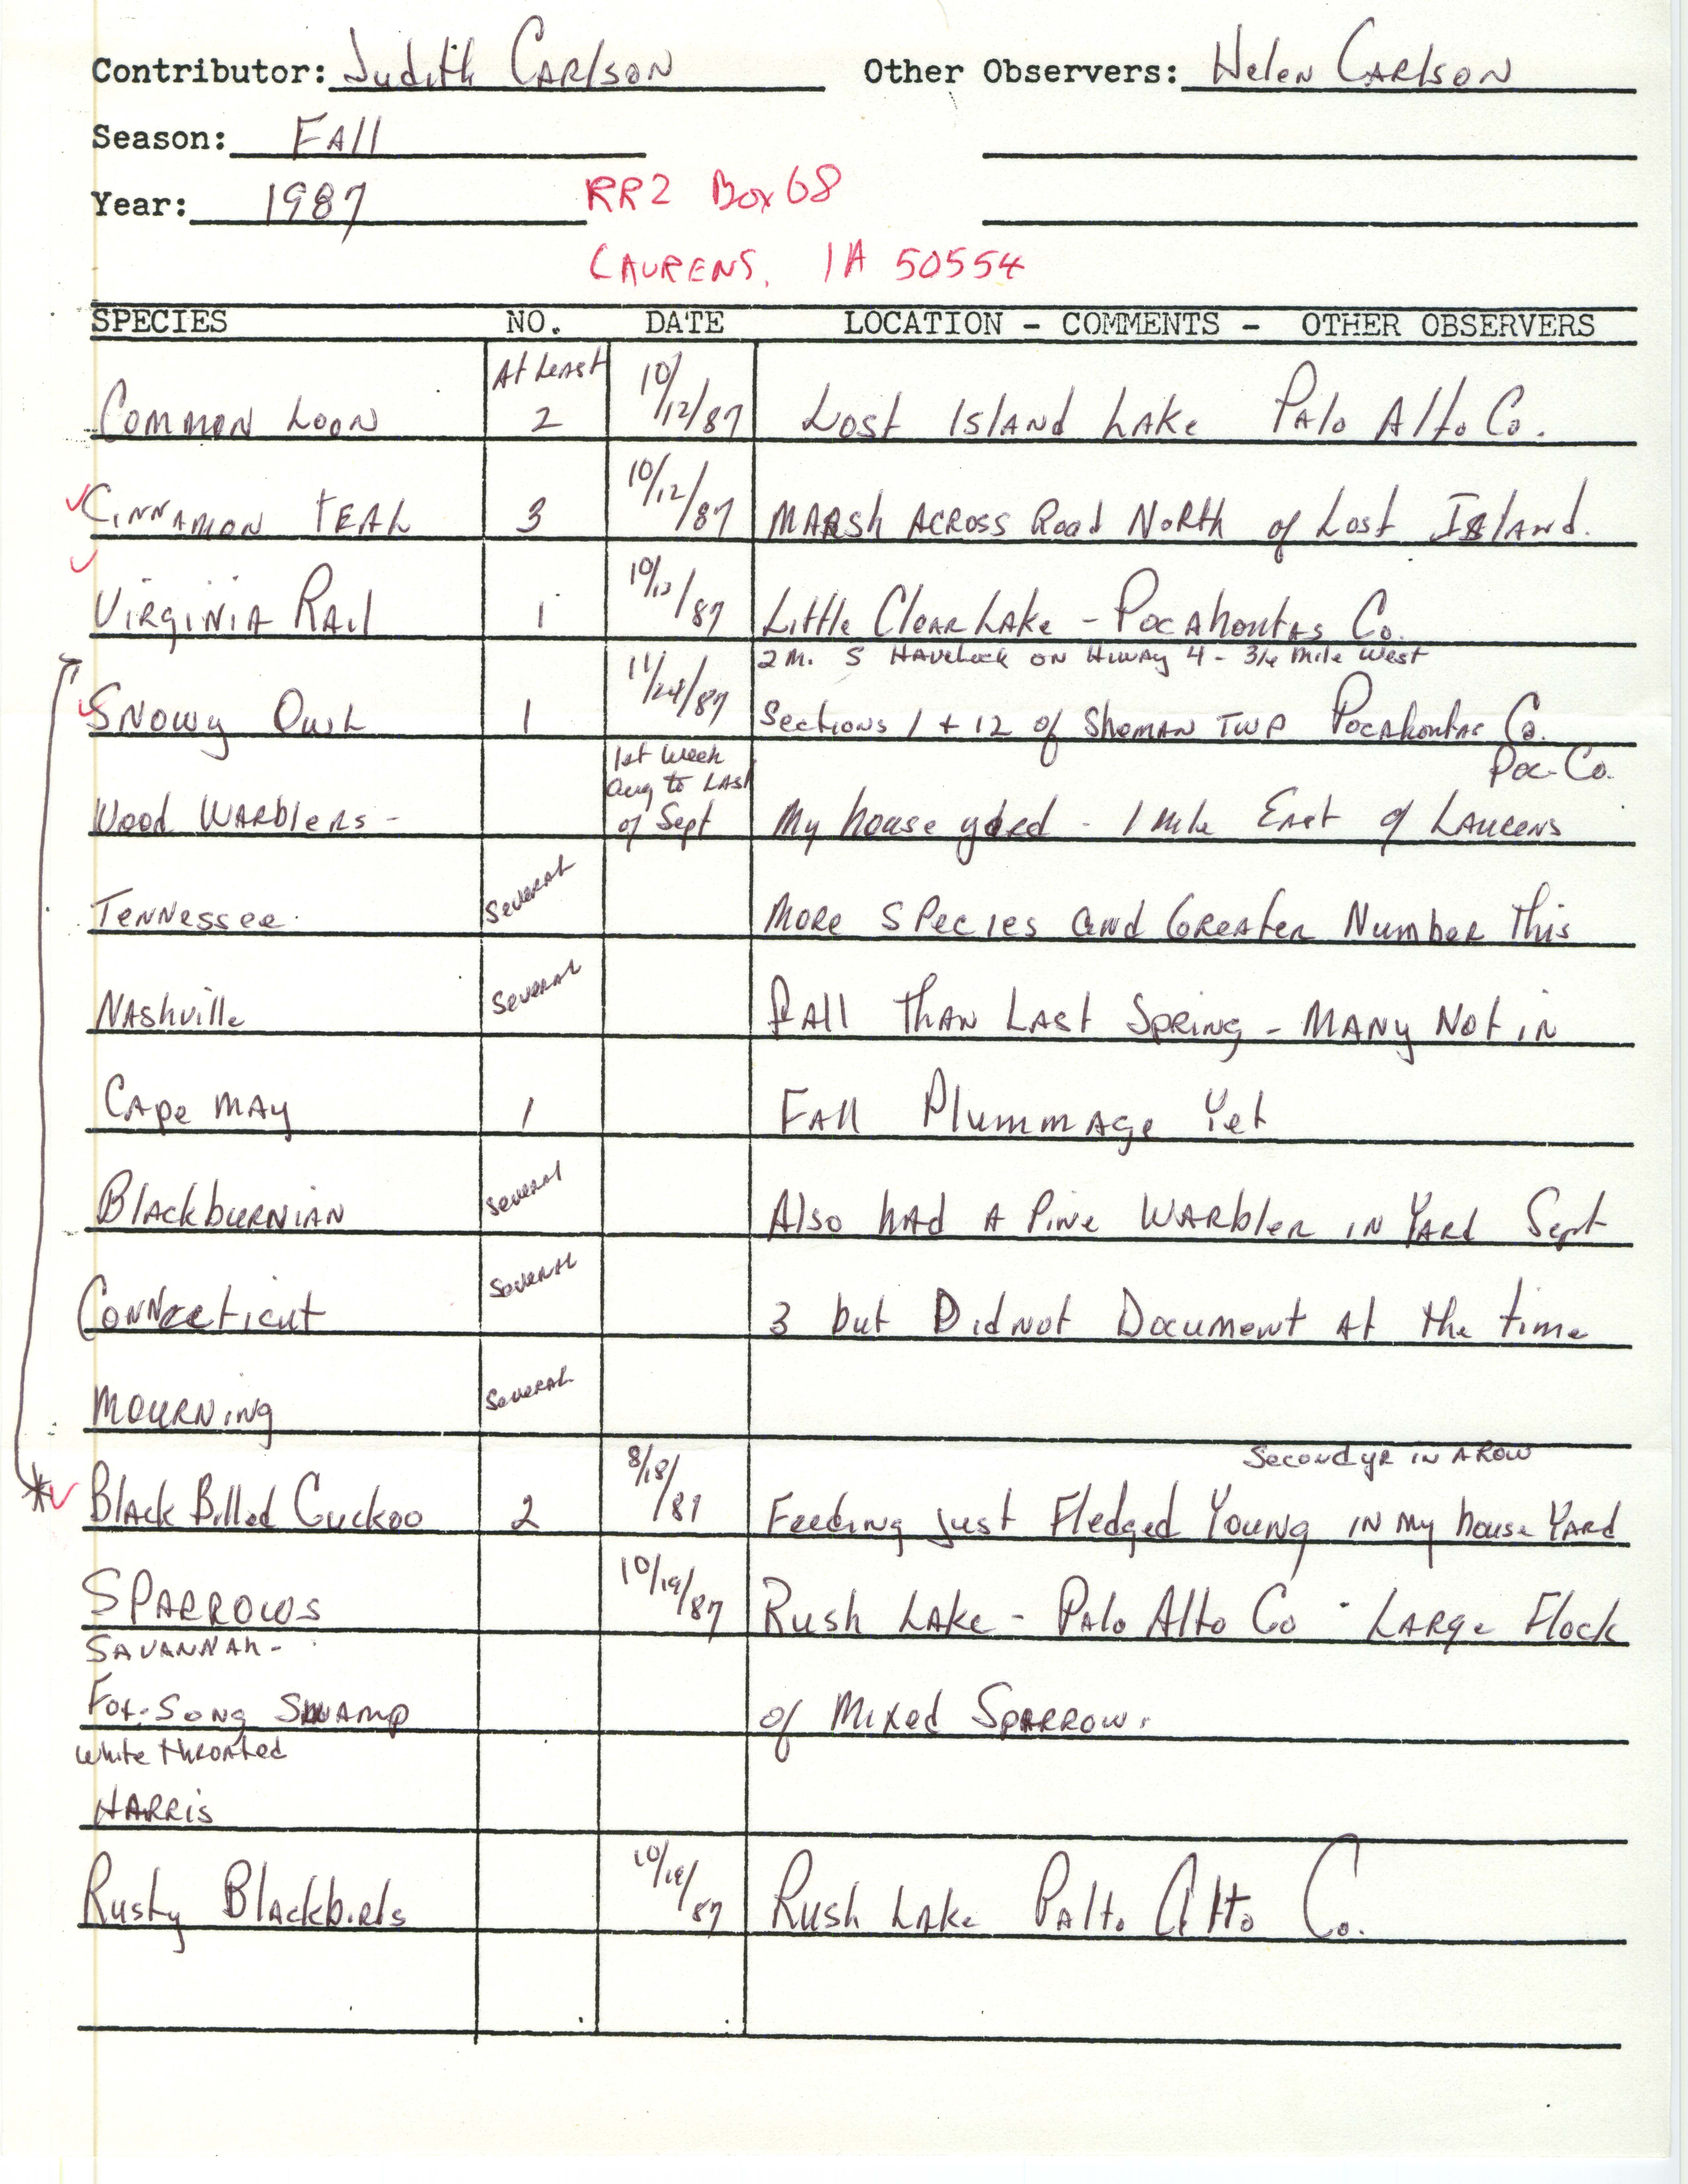 Field notes contributed by Judith Carlson, fall 1987